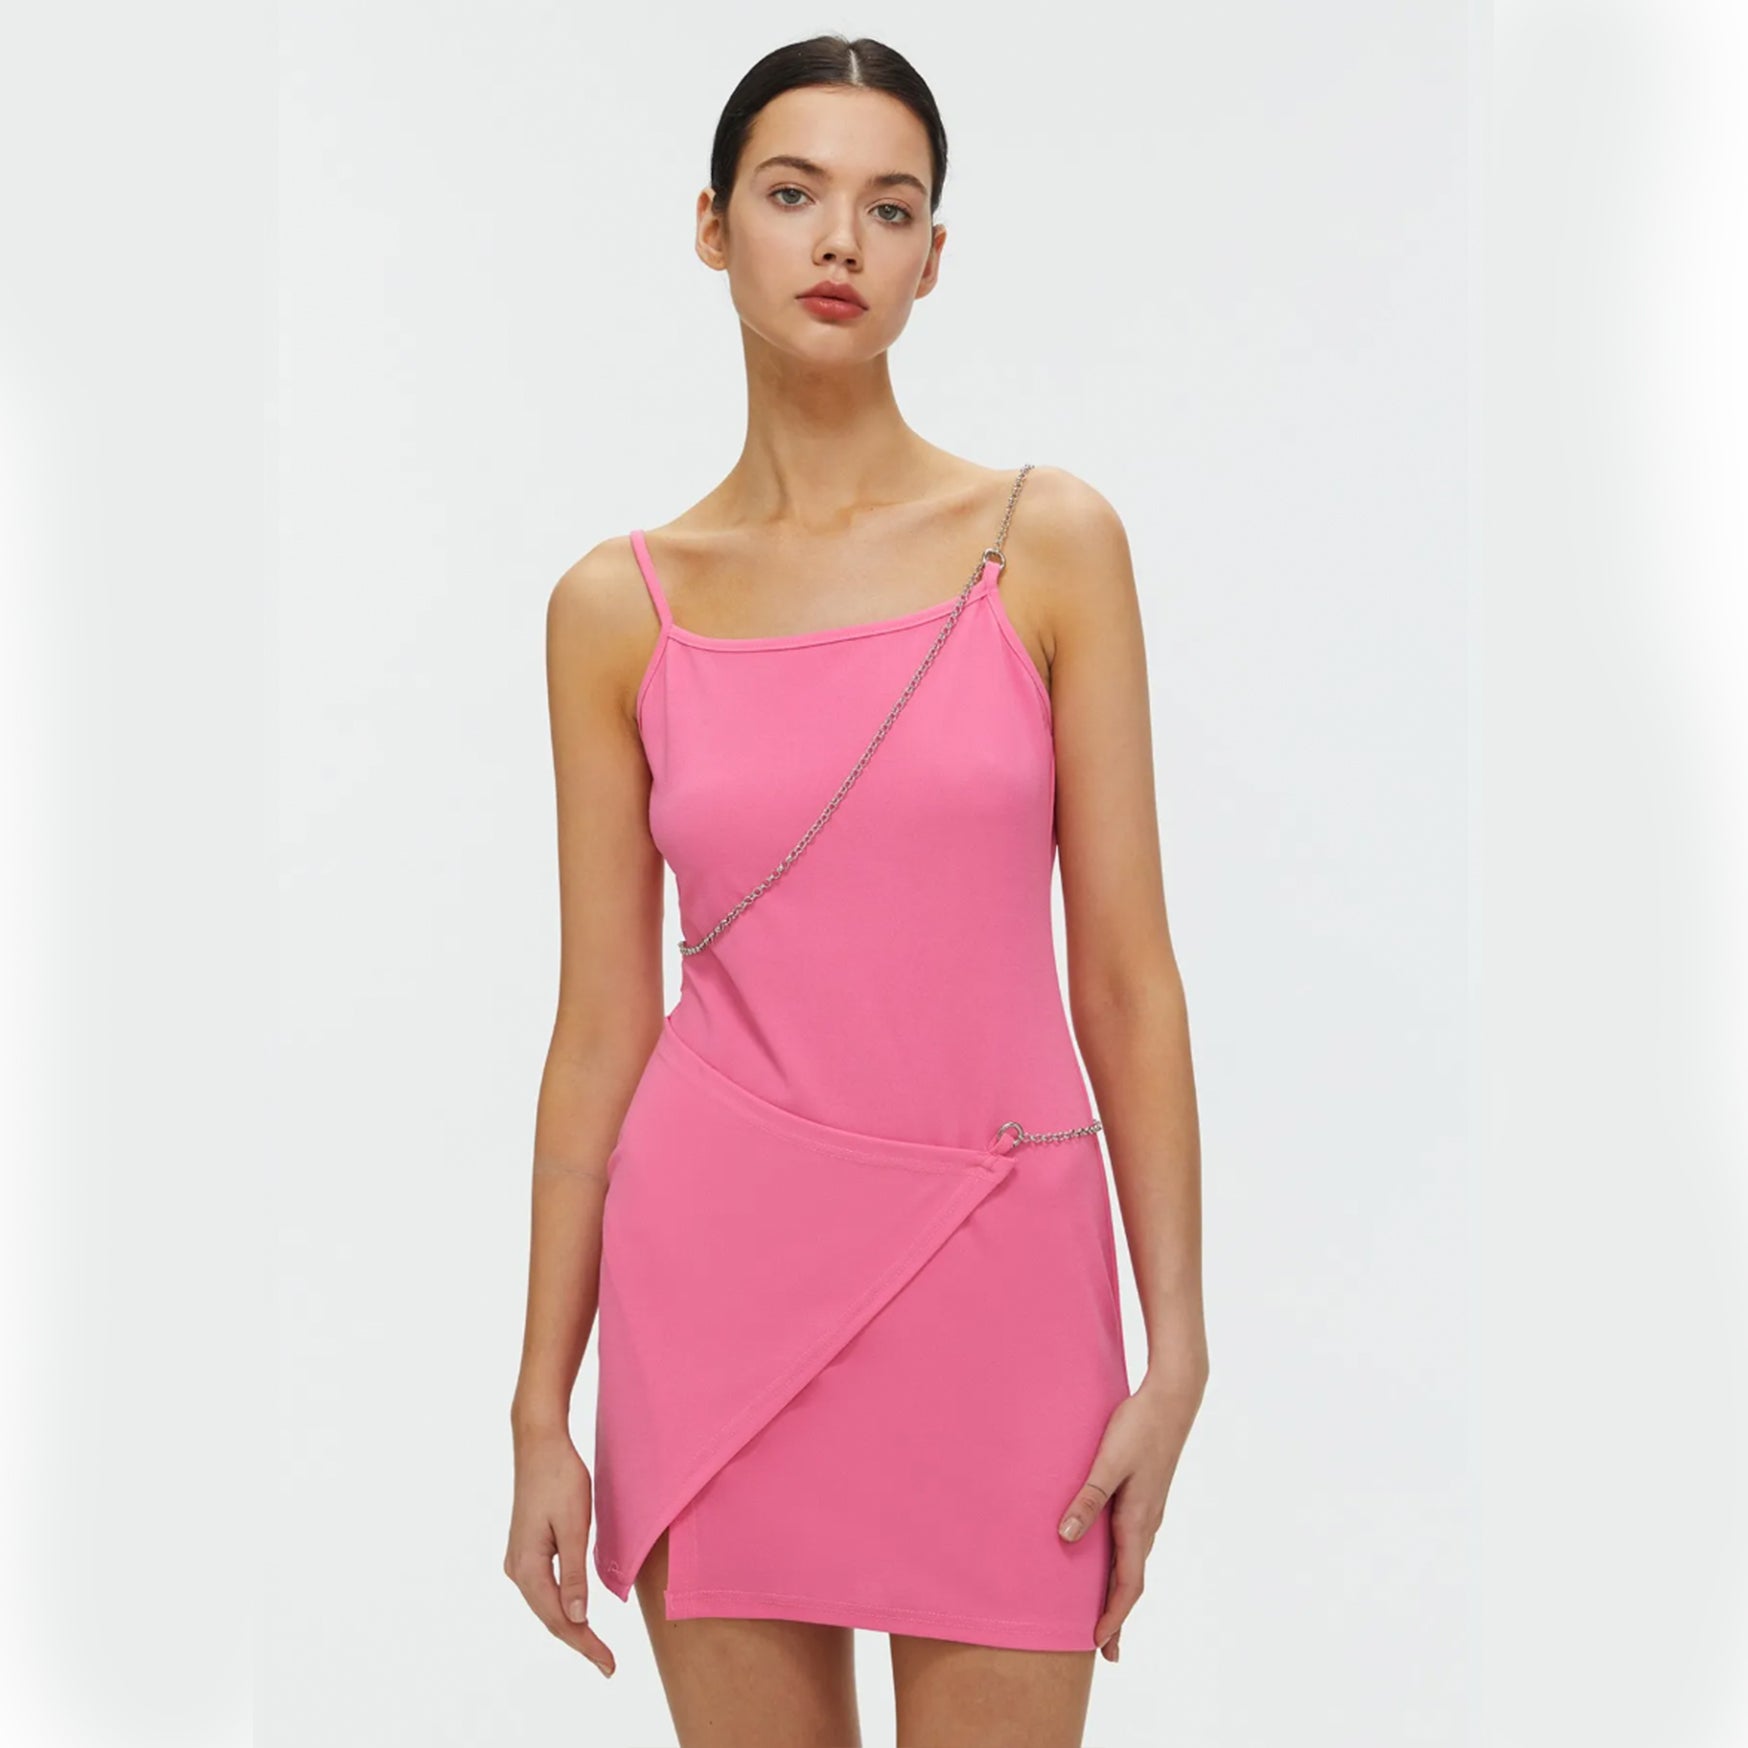 Asymmetric Short Dress With Chain Detail - Pink S